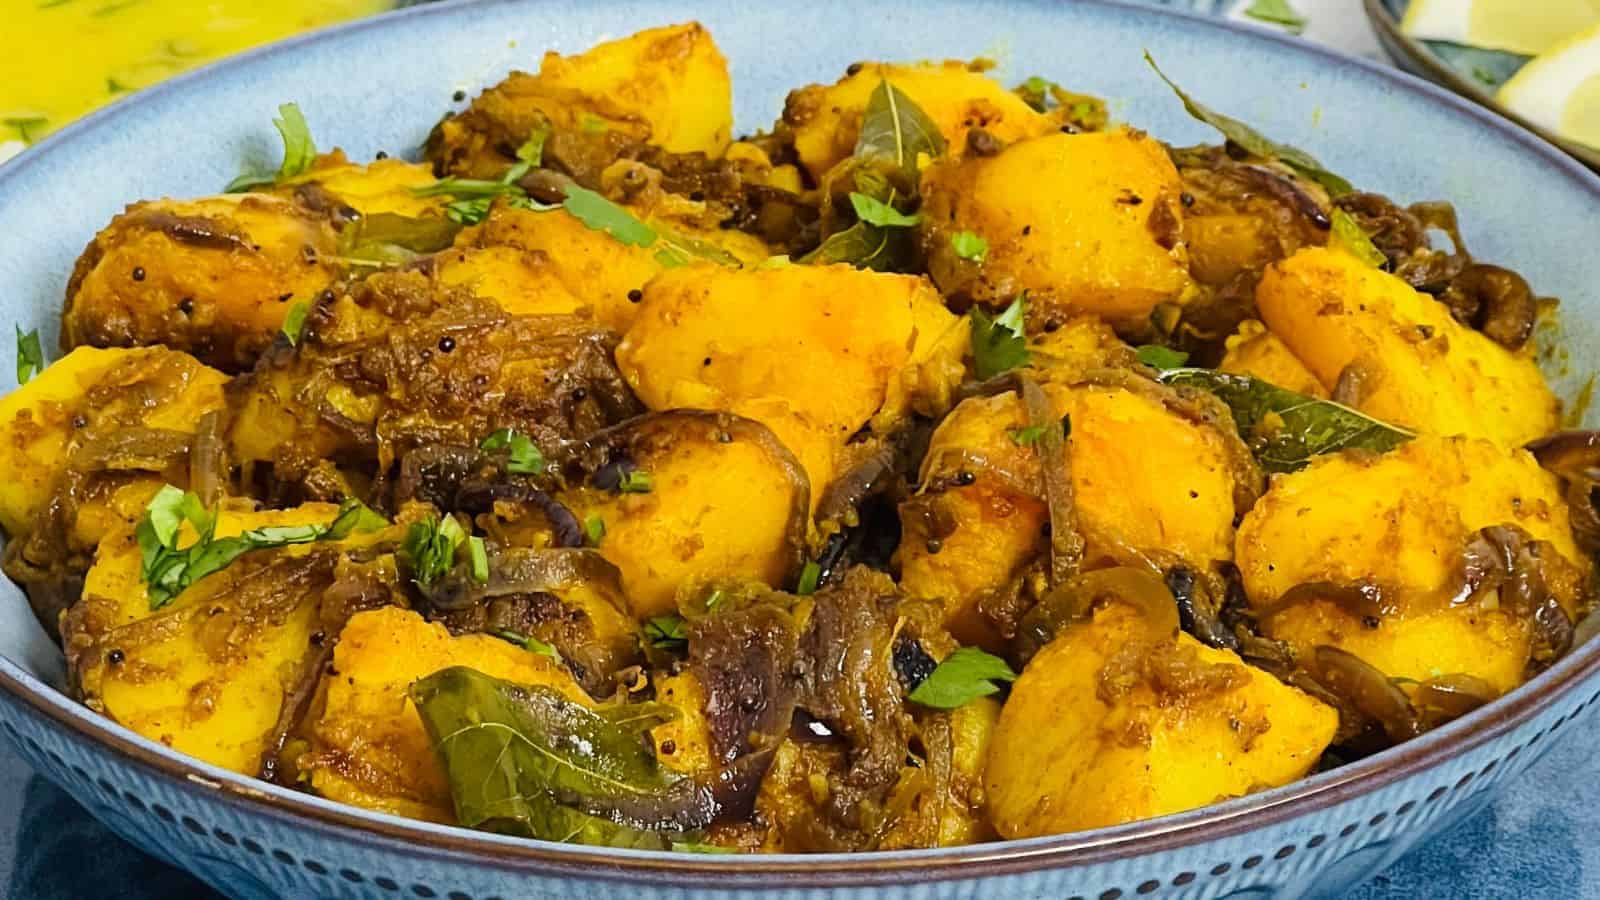 <p>A spiced potato dish bursting with flavor, simple yet impactful as a side dish complementing any meal. Celebrating the humble potato in a way that’s anything but ordinary, it brings a world of spices to life. Bombay Potatoes are a household favorite for their vibrant and hearty taste.<br><strong>Get the Recipe: </strong><a href="https://easyindiancookbook.com/bombay-potatoes/?utm_source=msn&utm_medium=page&utm_campaign=">Bombay Potatoes</a></p>